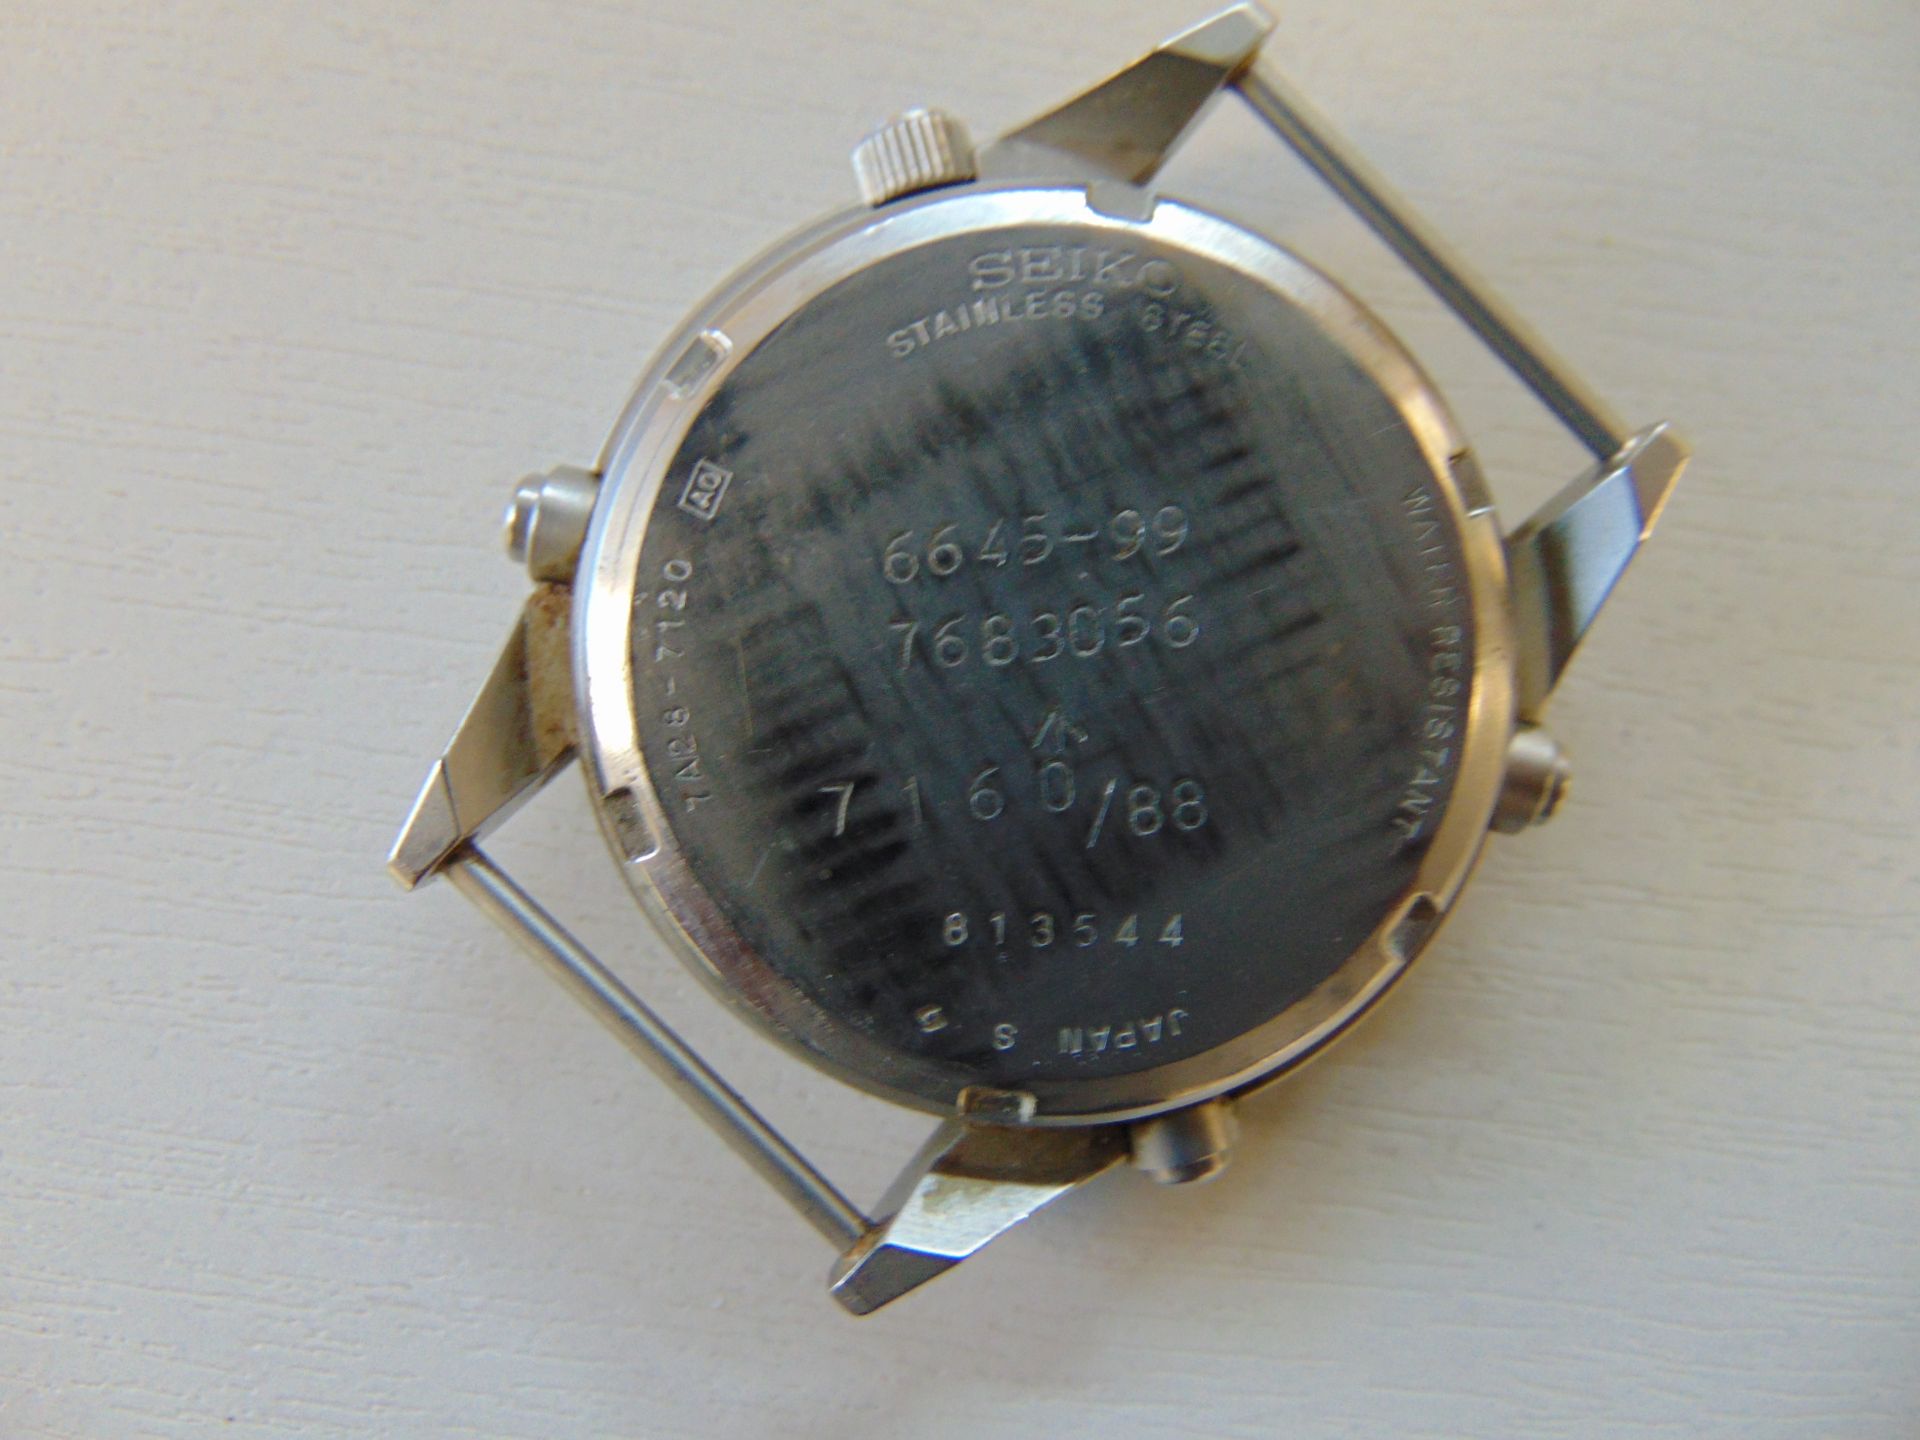 Rare Seiko Generation 1 Aircrew Chrono RAF Harrier Force Issue Nato Marks, Date 1988 - Image 5 of 6